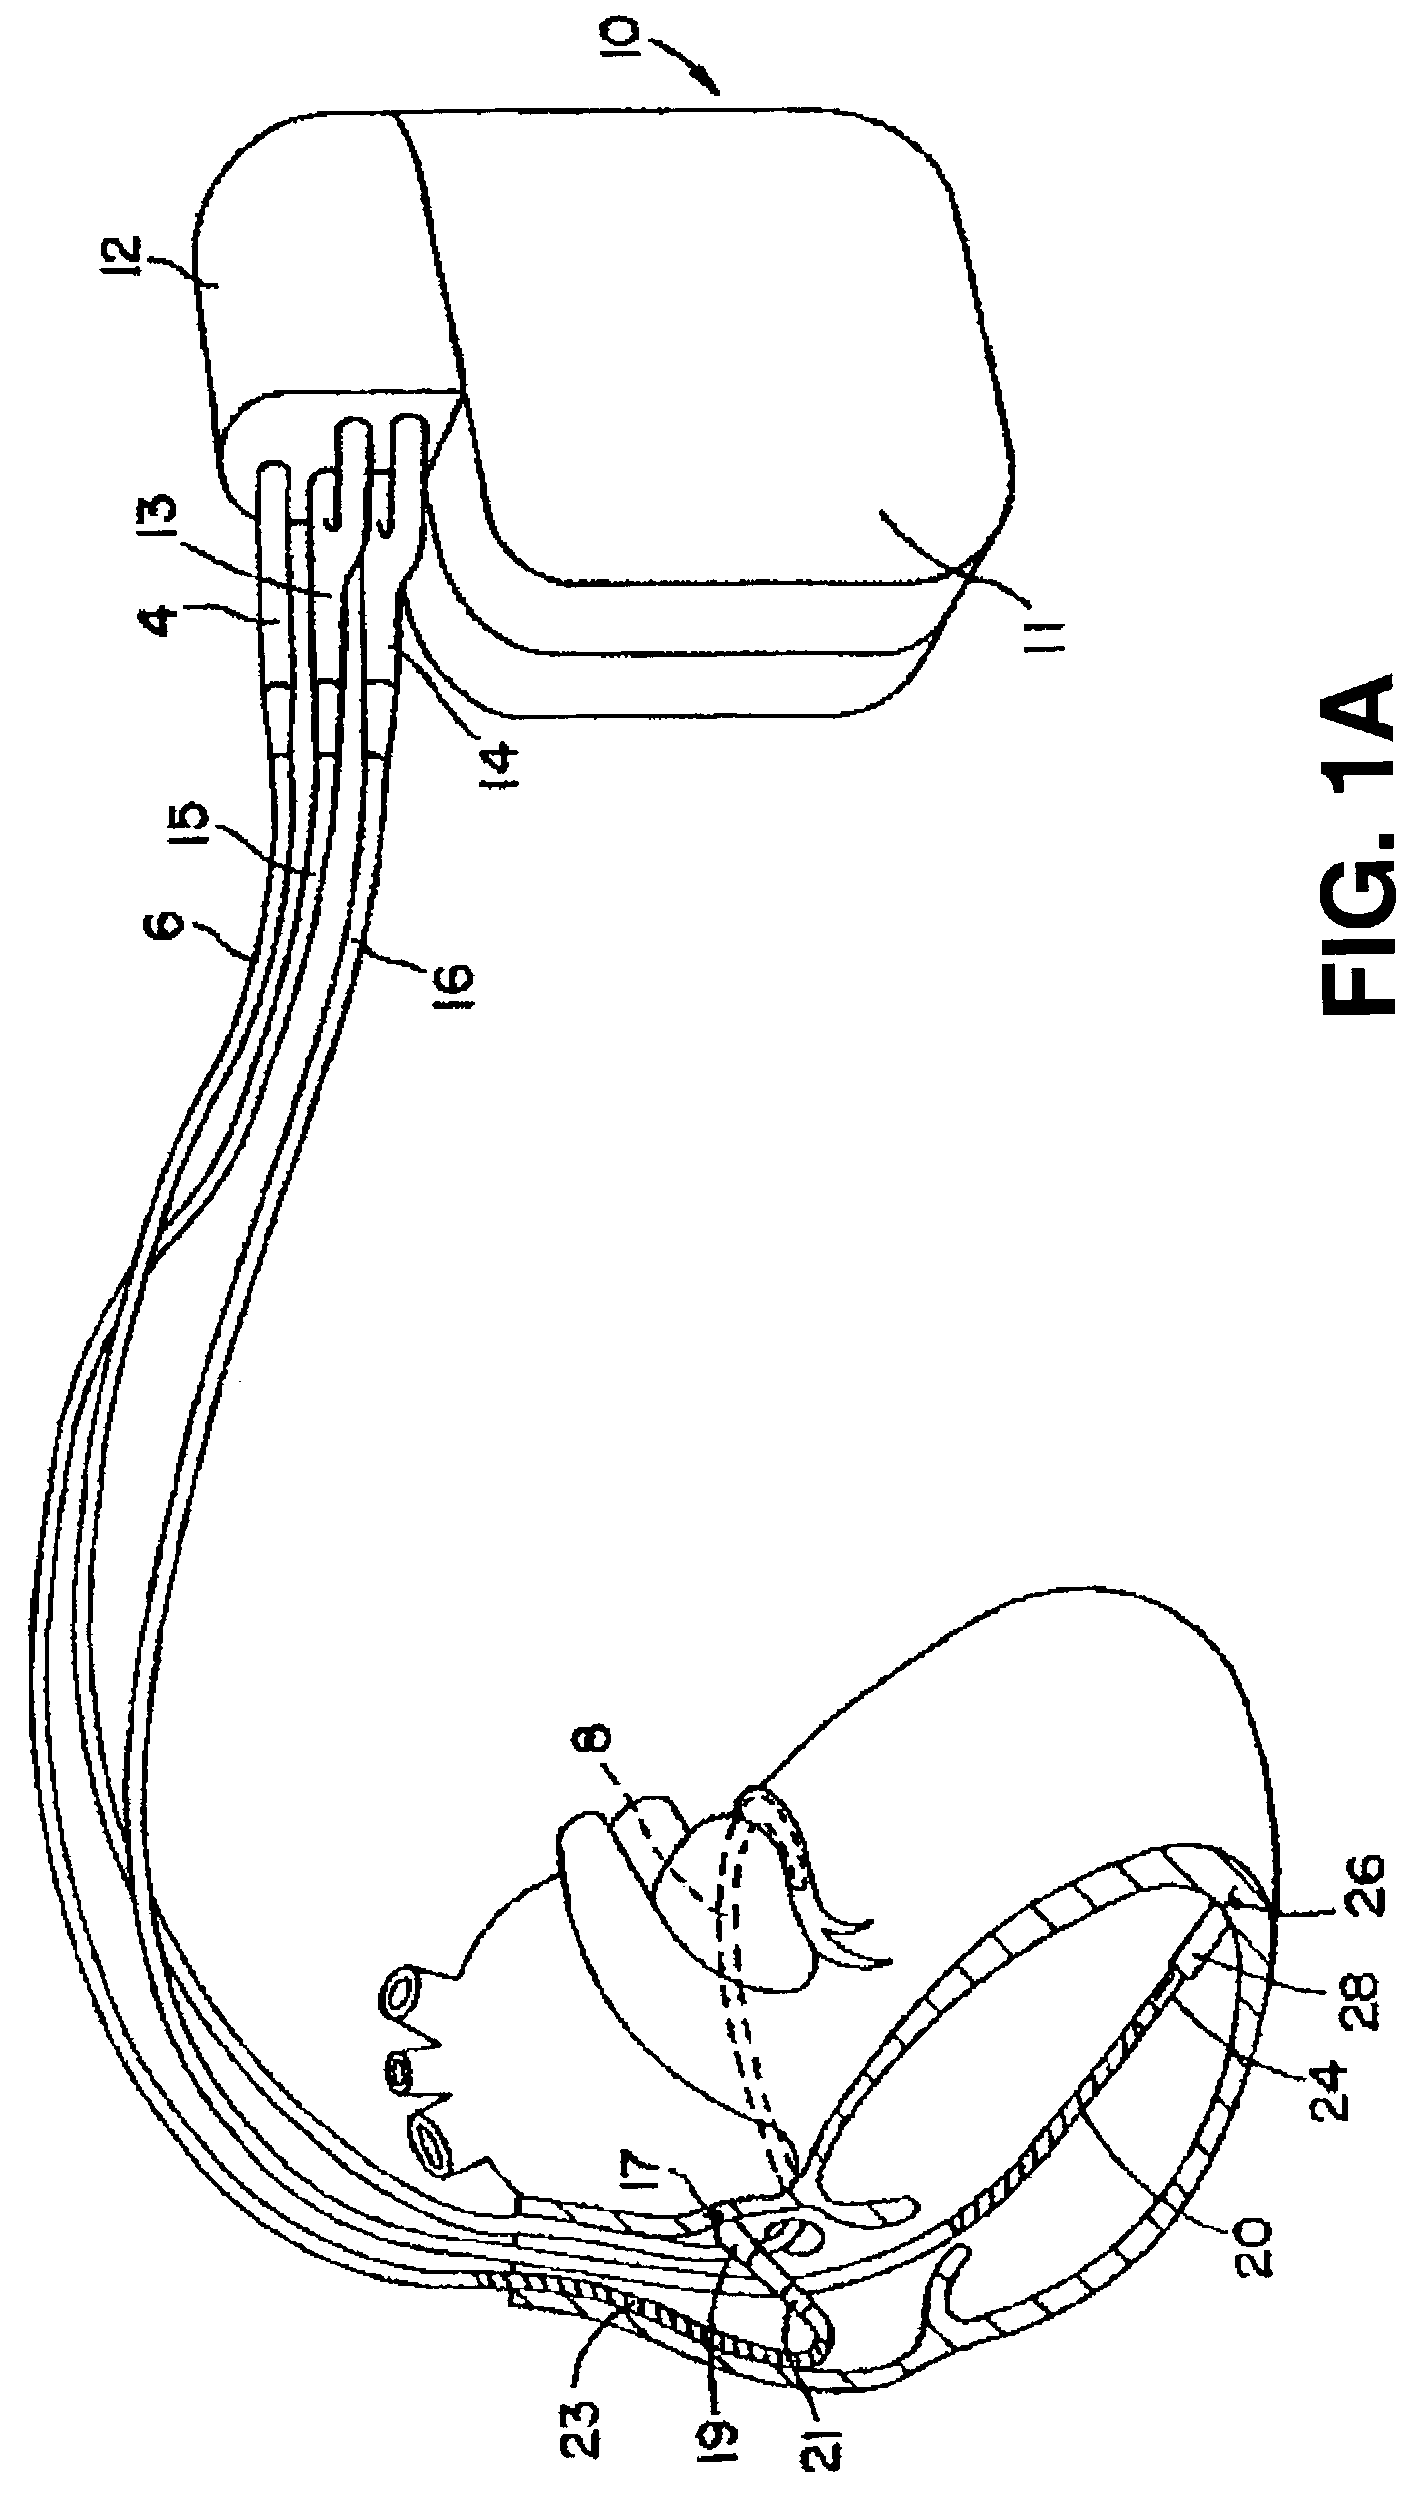 Method for elimination of ventricular pro-arrhythmic effect caused by atrial therapy